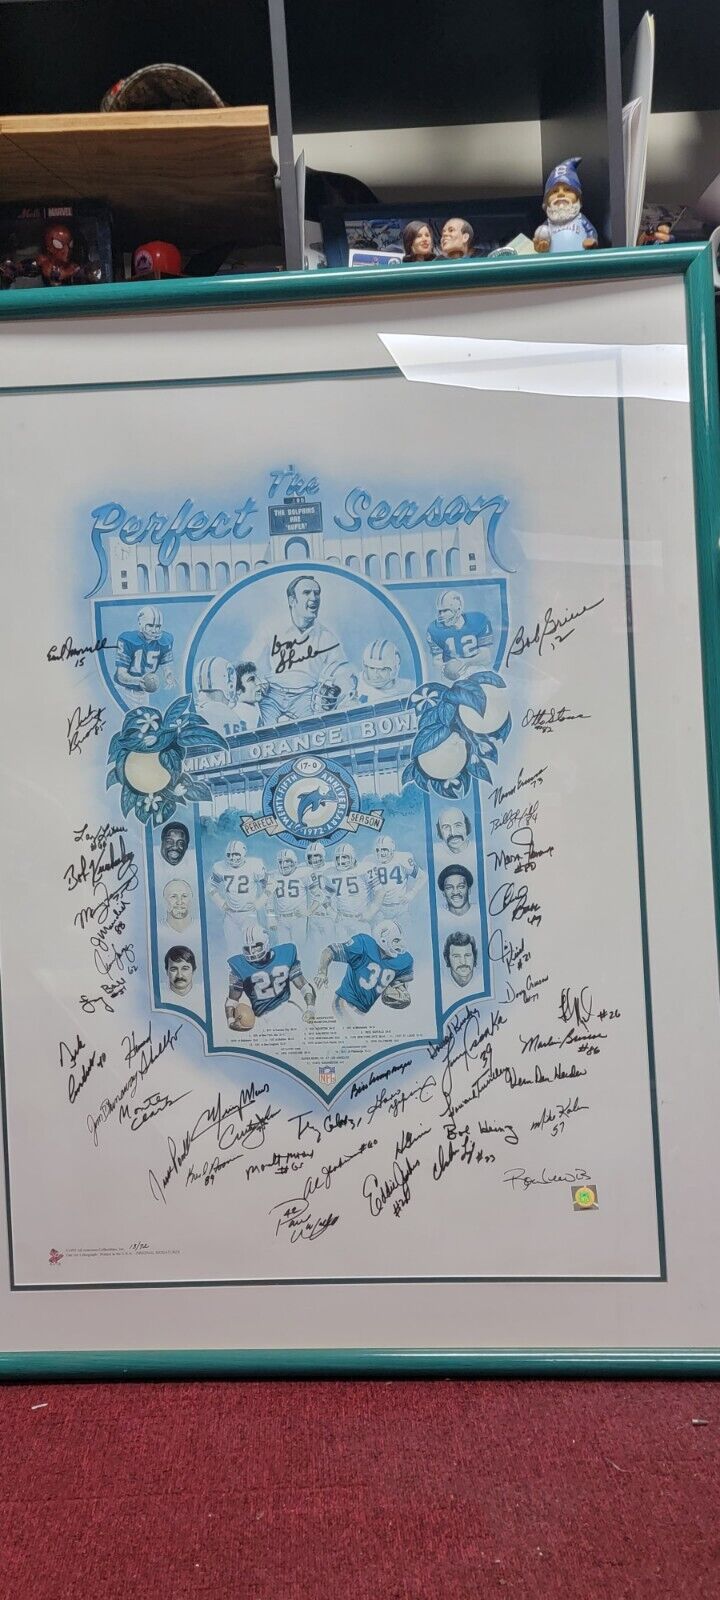 The Miami Dolphins Perfect Season Lithograph, 1972, Signed By Artist And Players